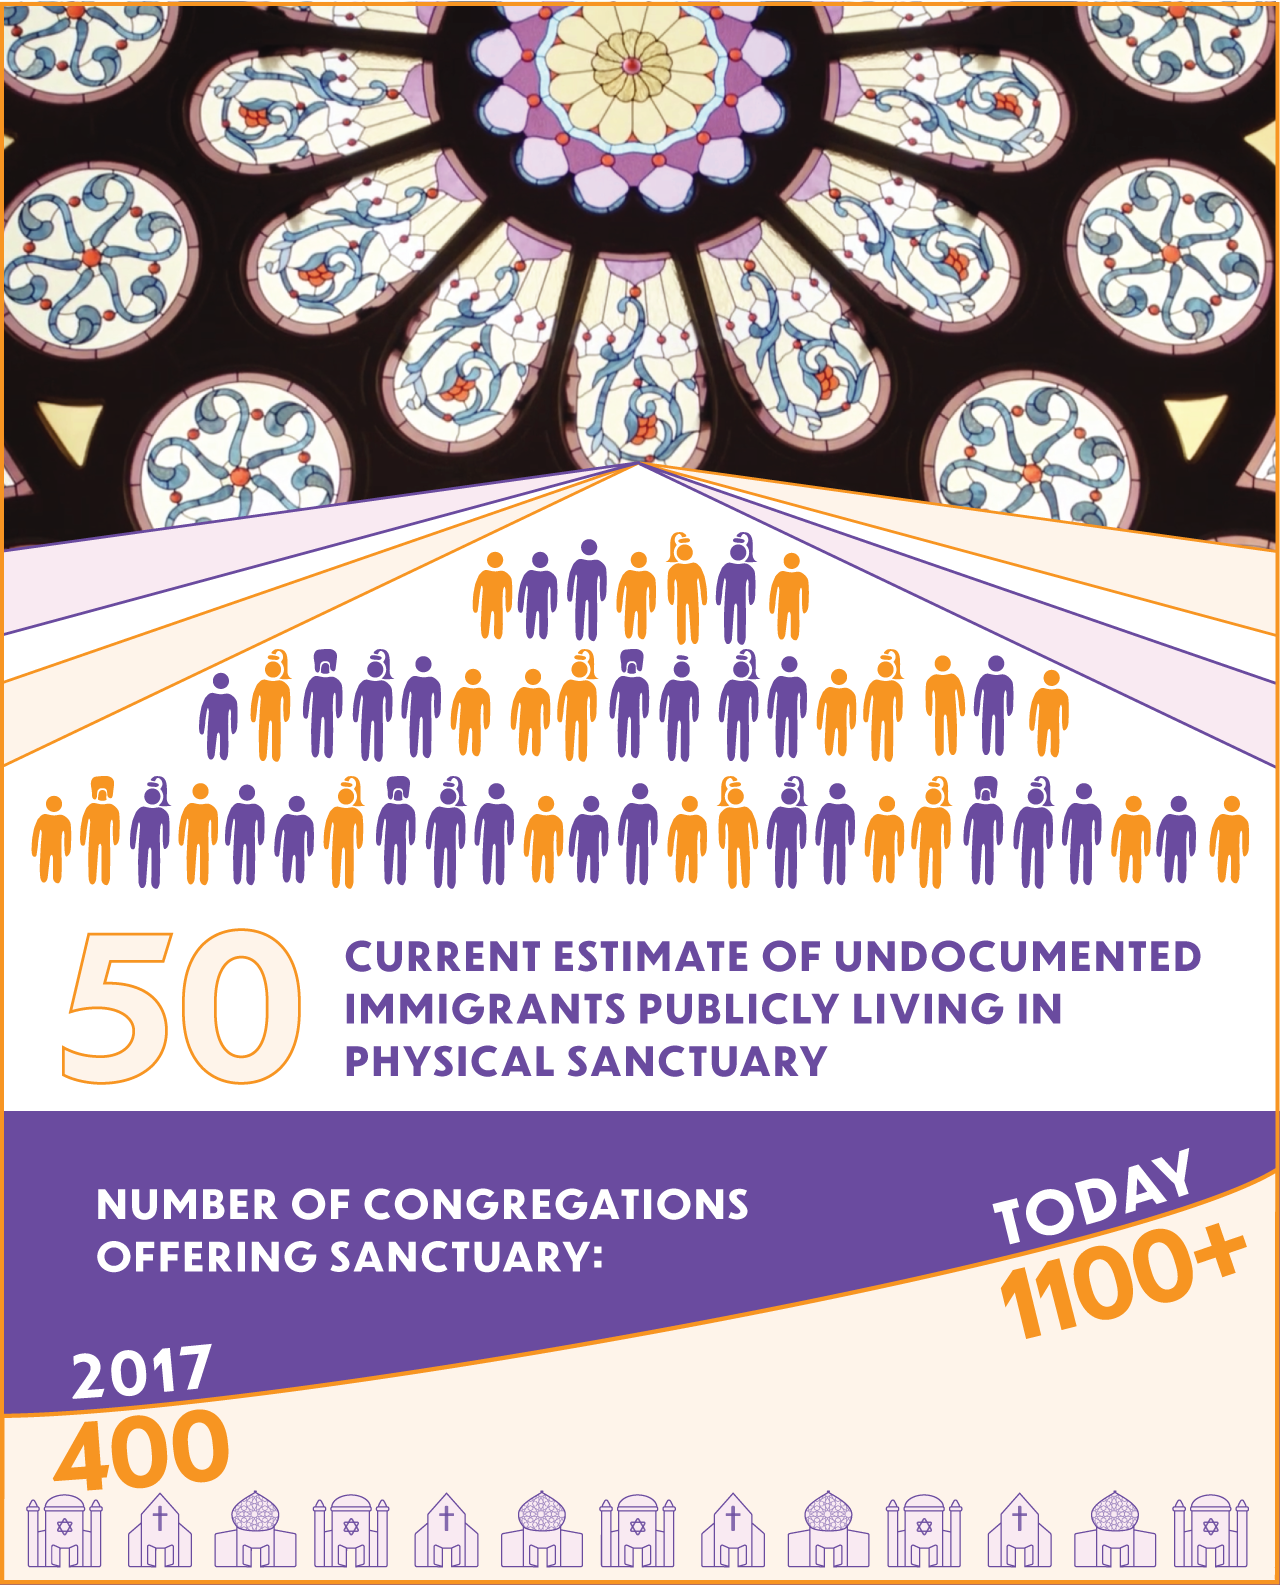 50: Current estimate of undocumented immigrants publicly living in physical sanctuary. Number of Congregations Offering Sanctuary: 2017 - 400; Today: 100+